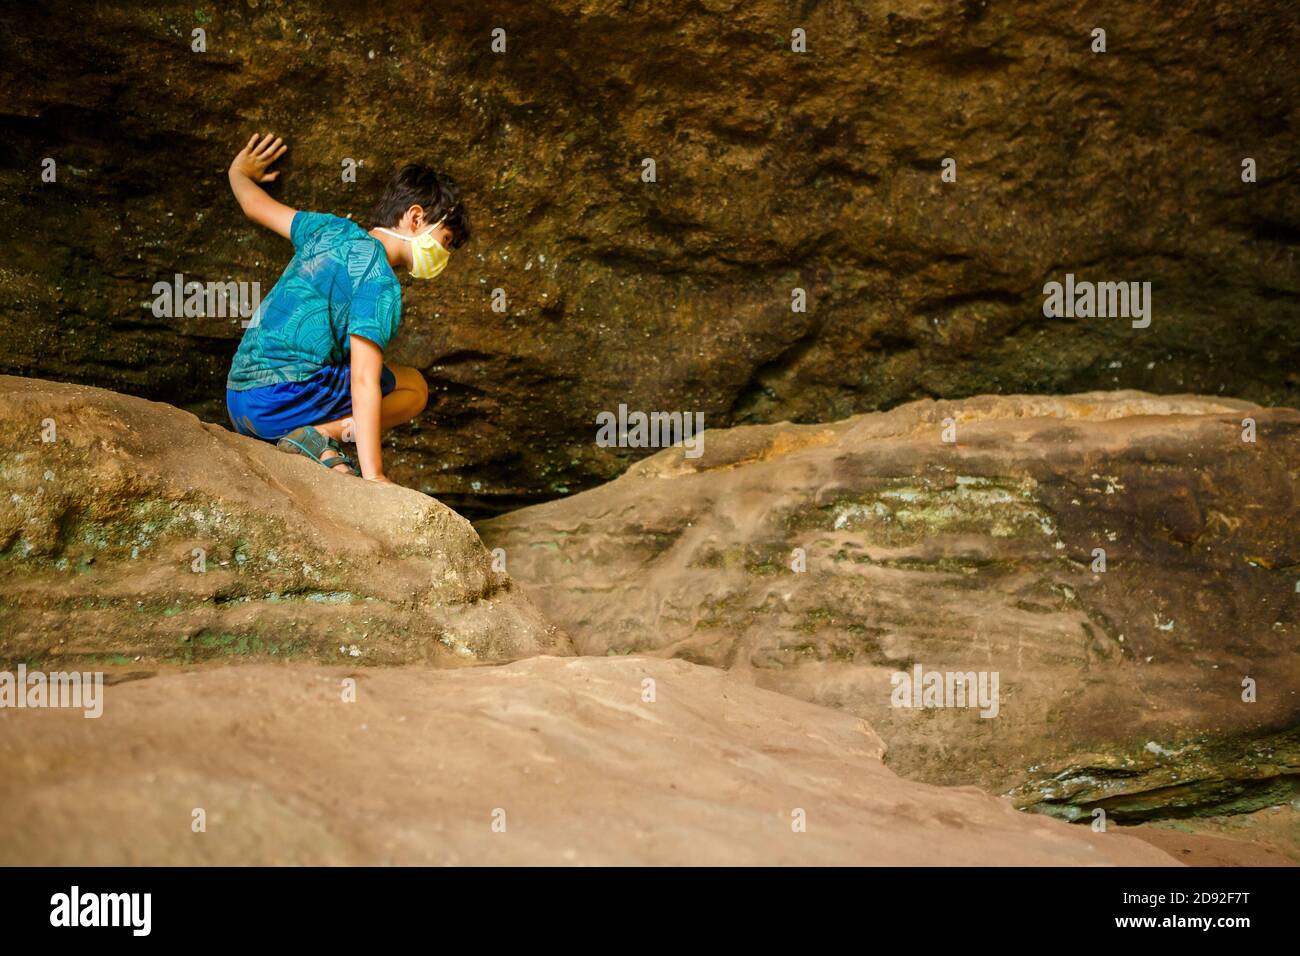 A boy crawls across boulders against rock wall in sandstone gorge Stock Photo